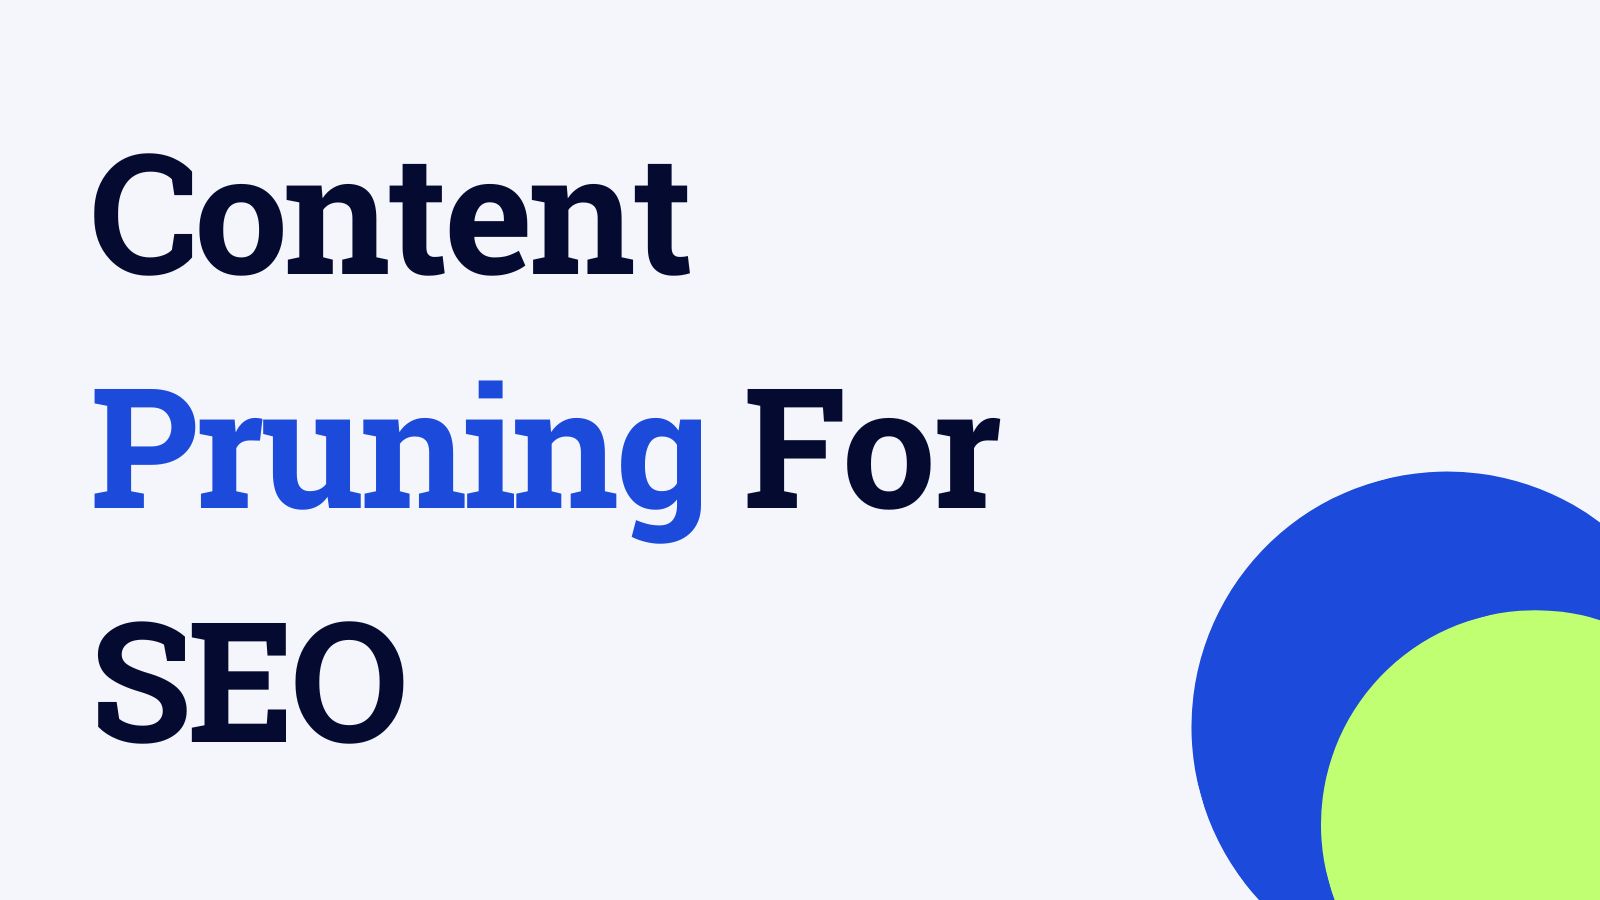 Content Pruning For SEO